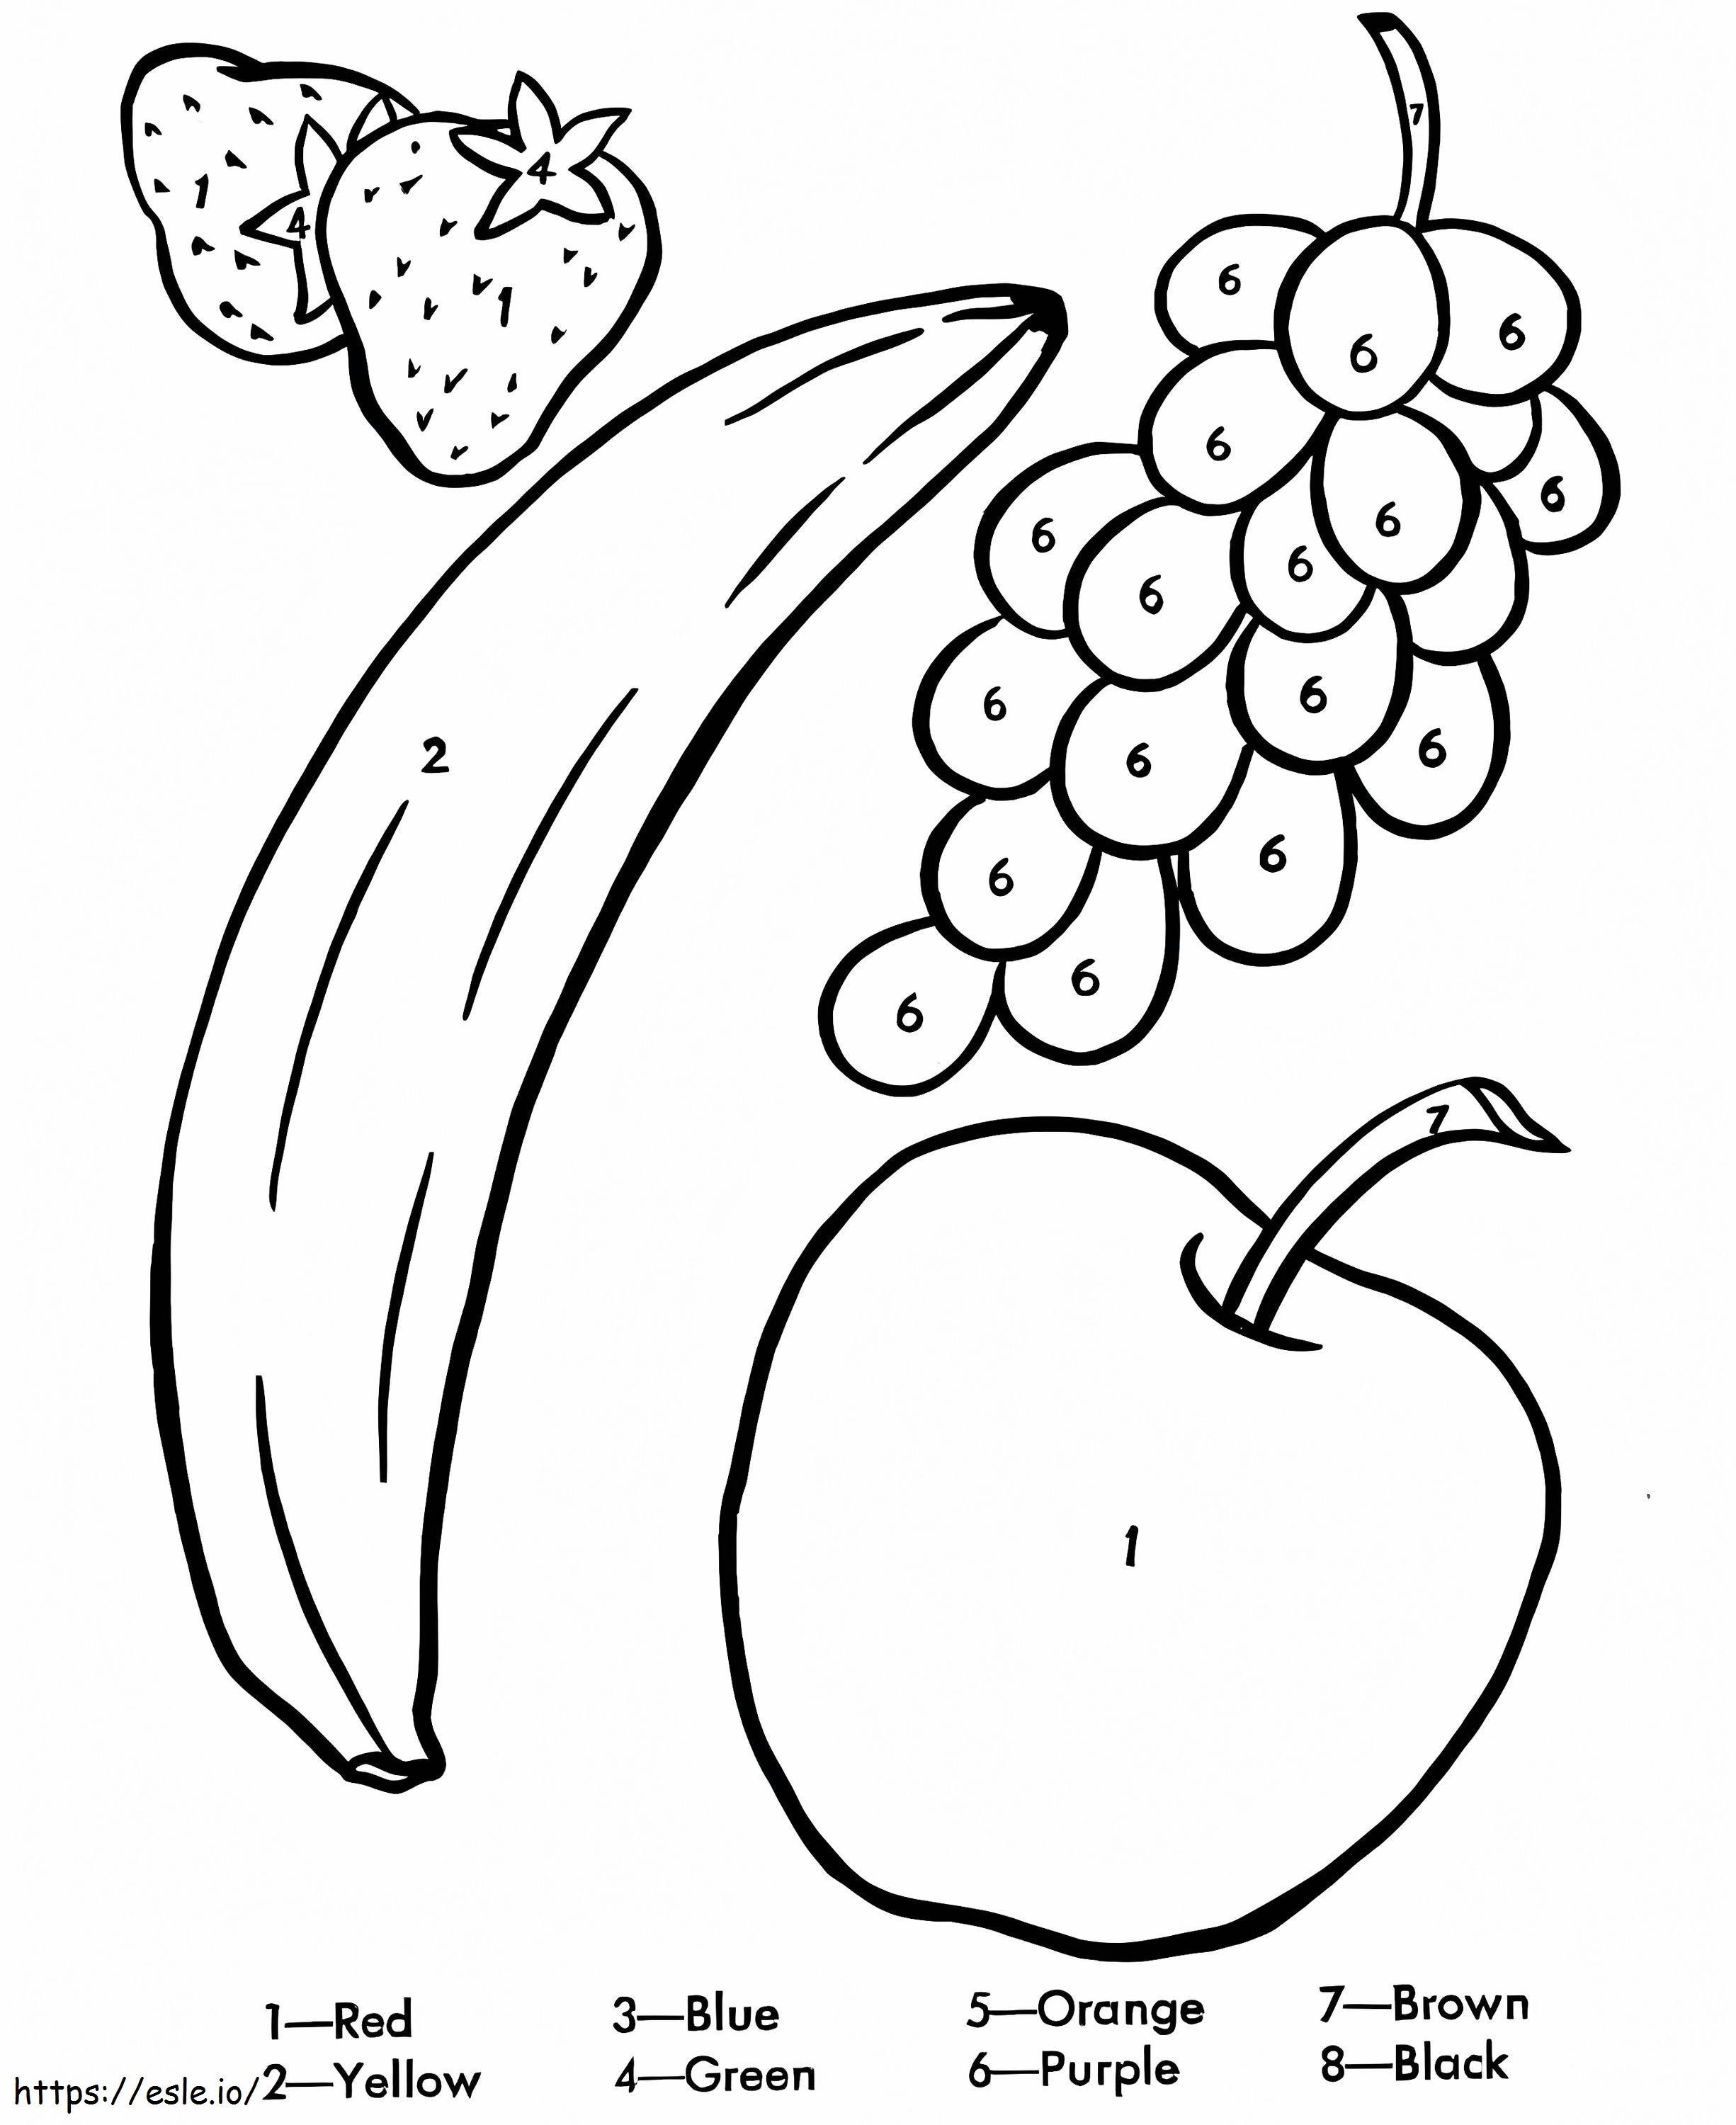 Color Of Grapes And Fruits By Number coloring page